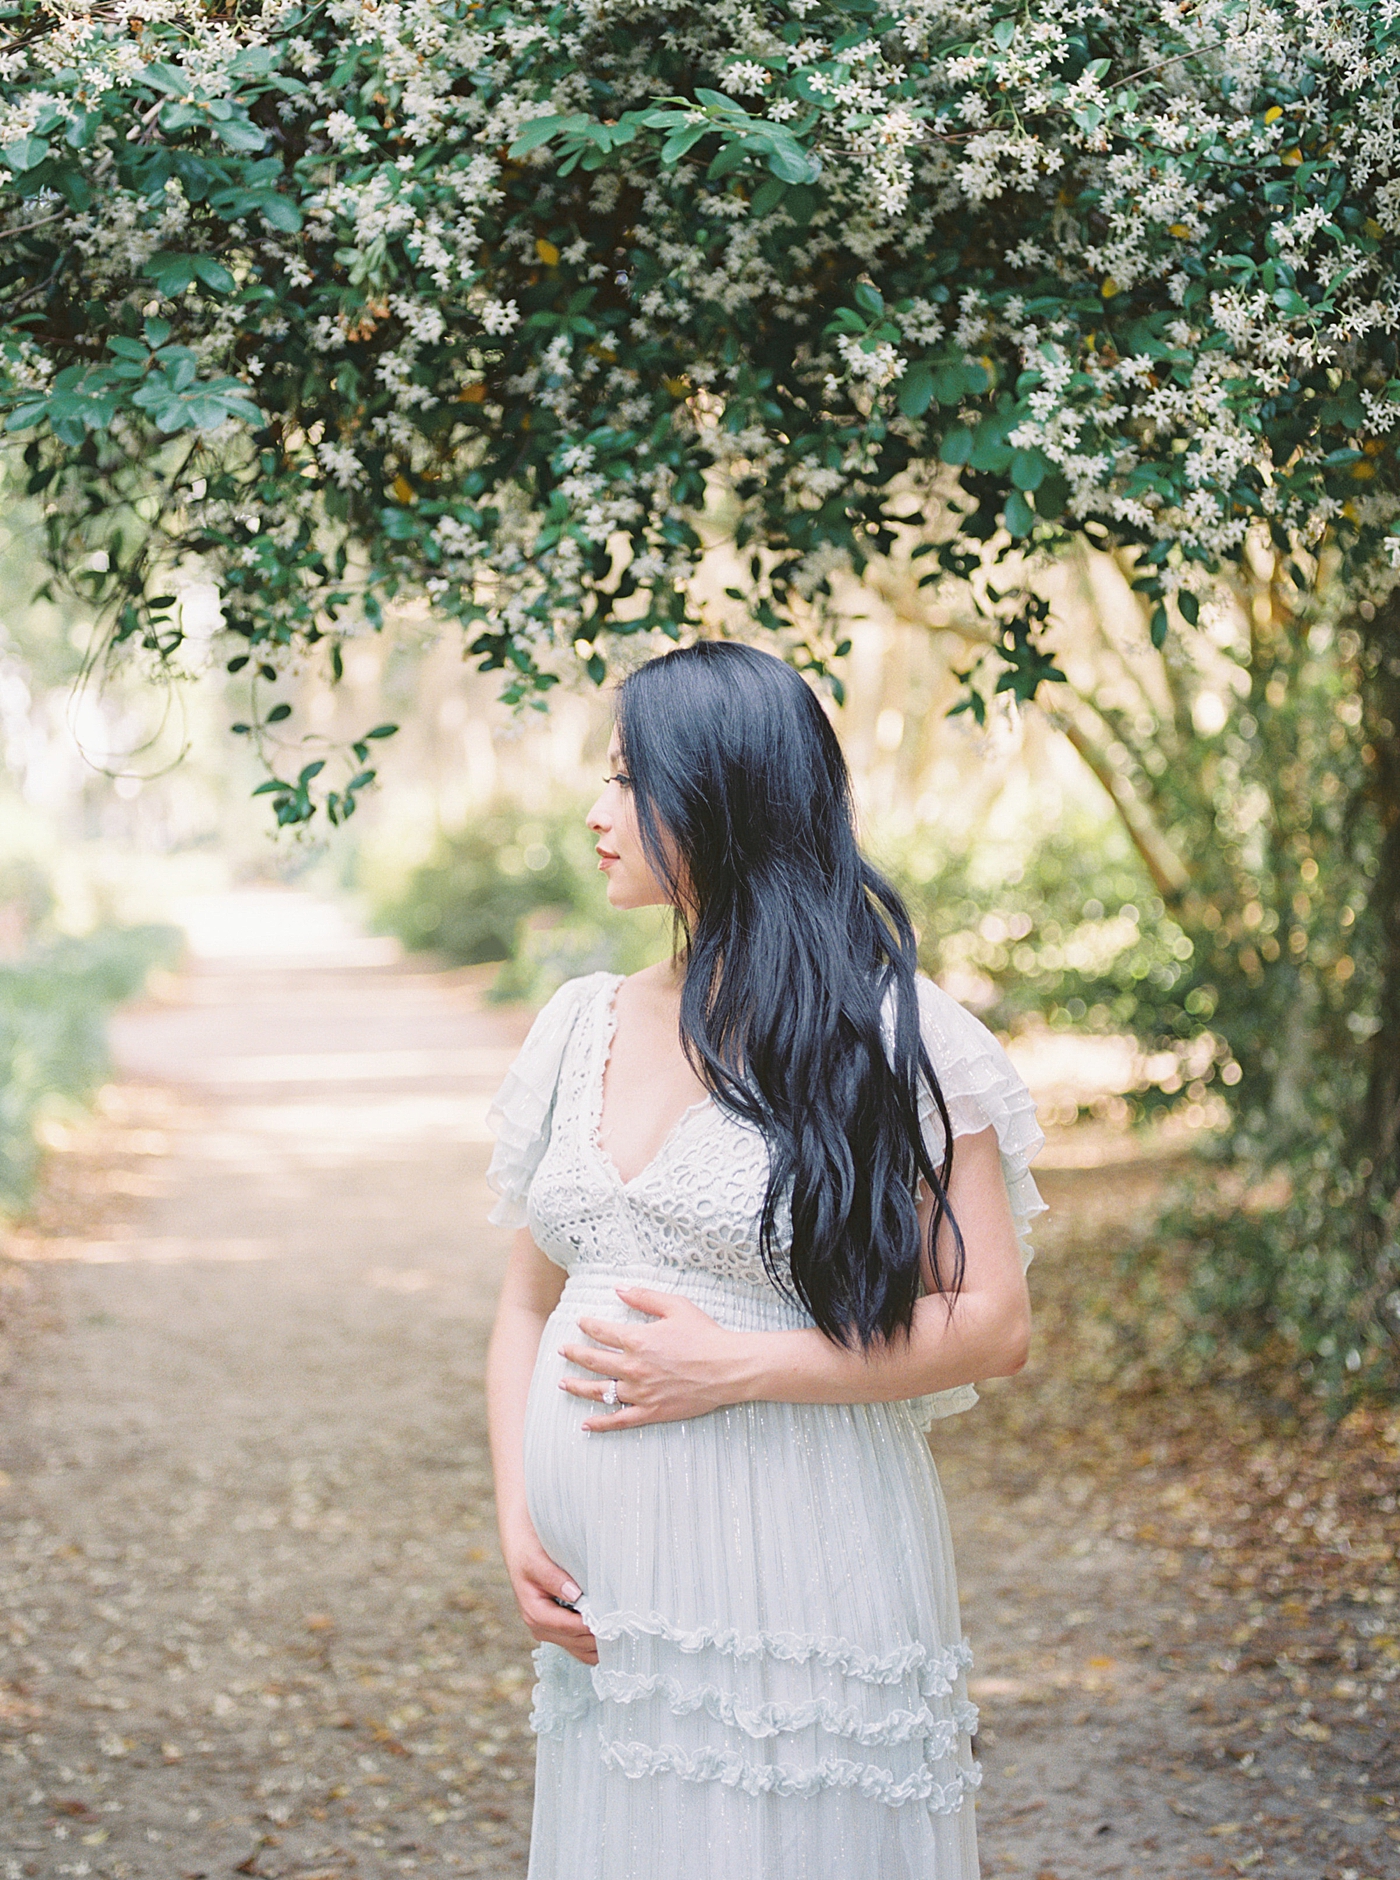 Mother to be with long dark hair holding her belly | Photo by Caitlyn Motycka Photography